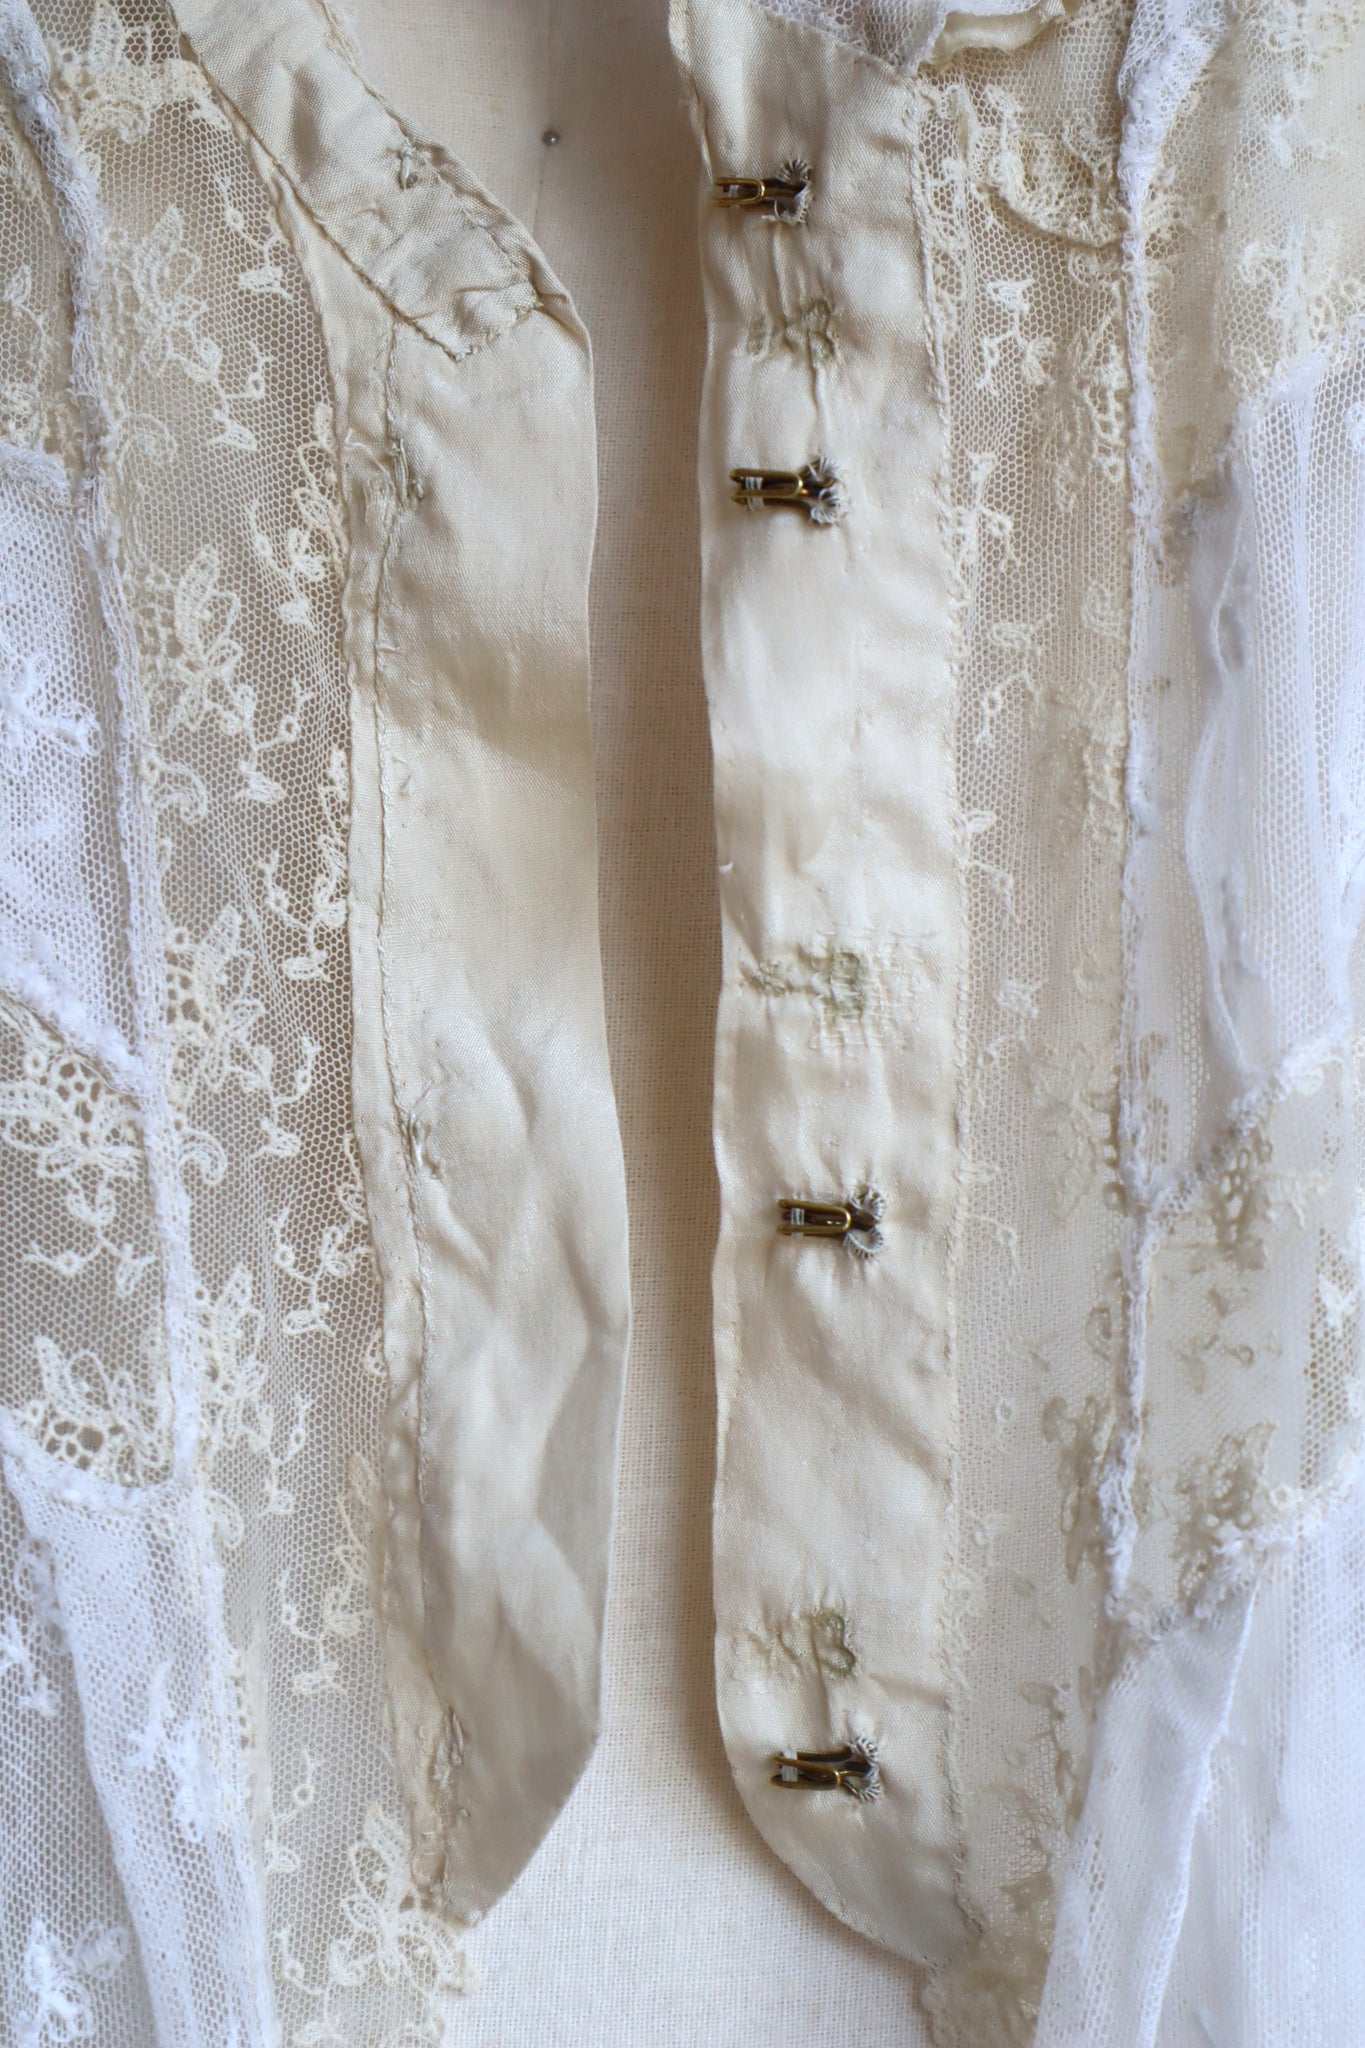 1890s Edwardian High Neck All Lace Blouse